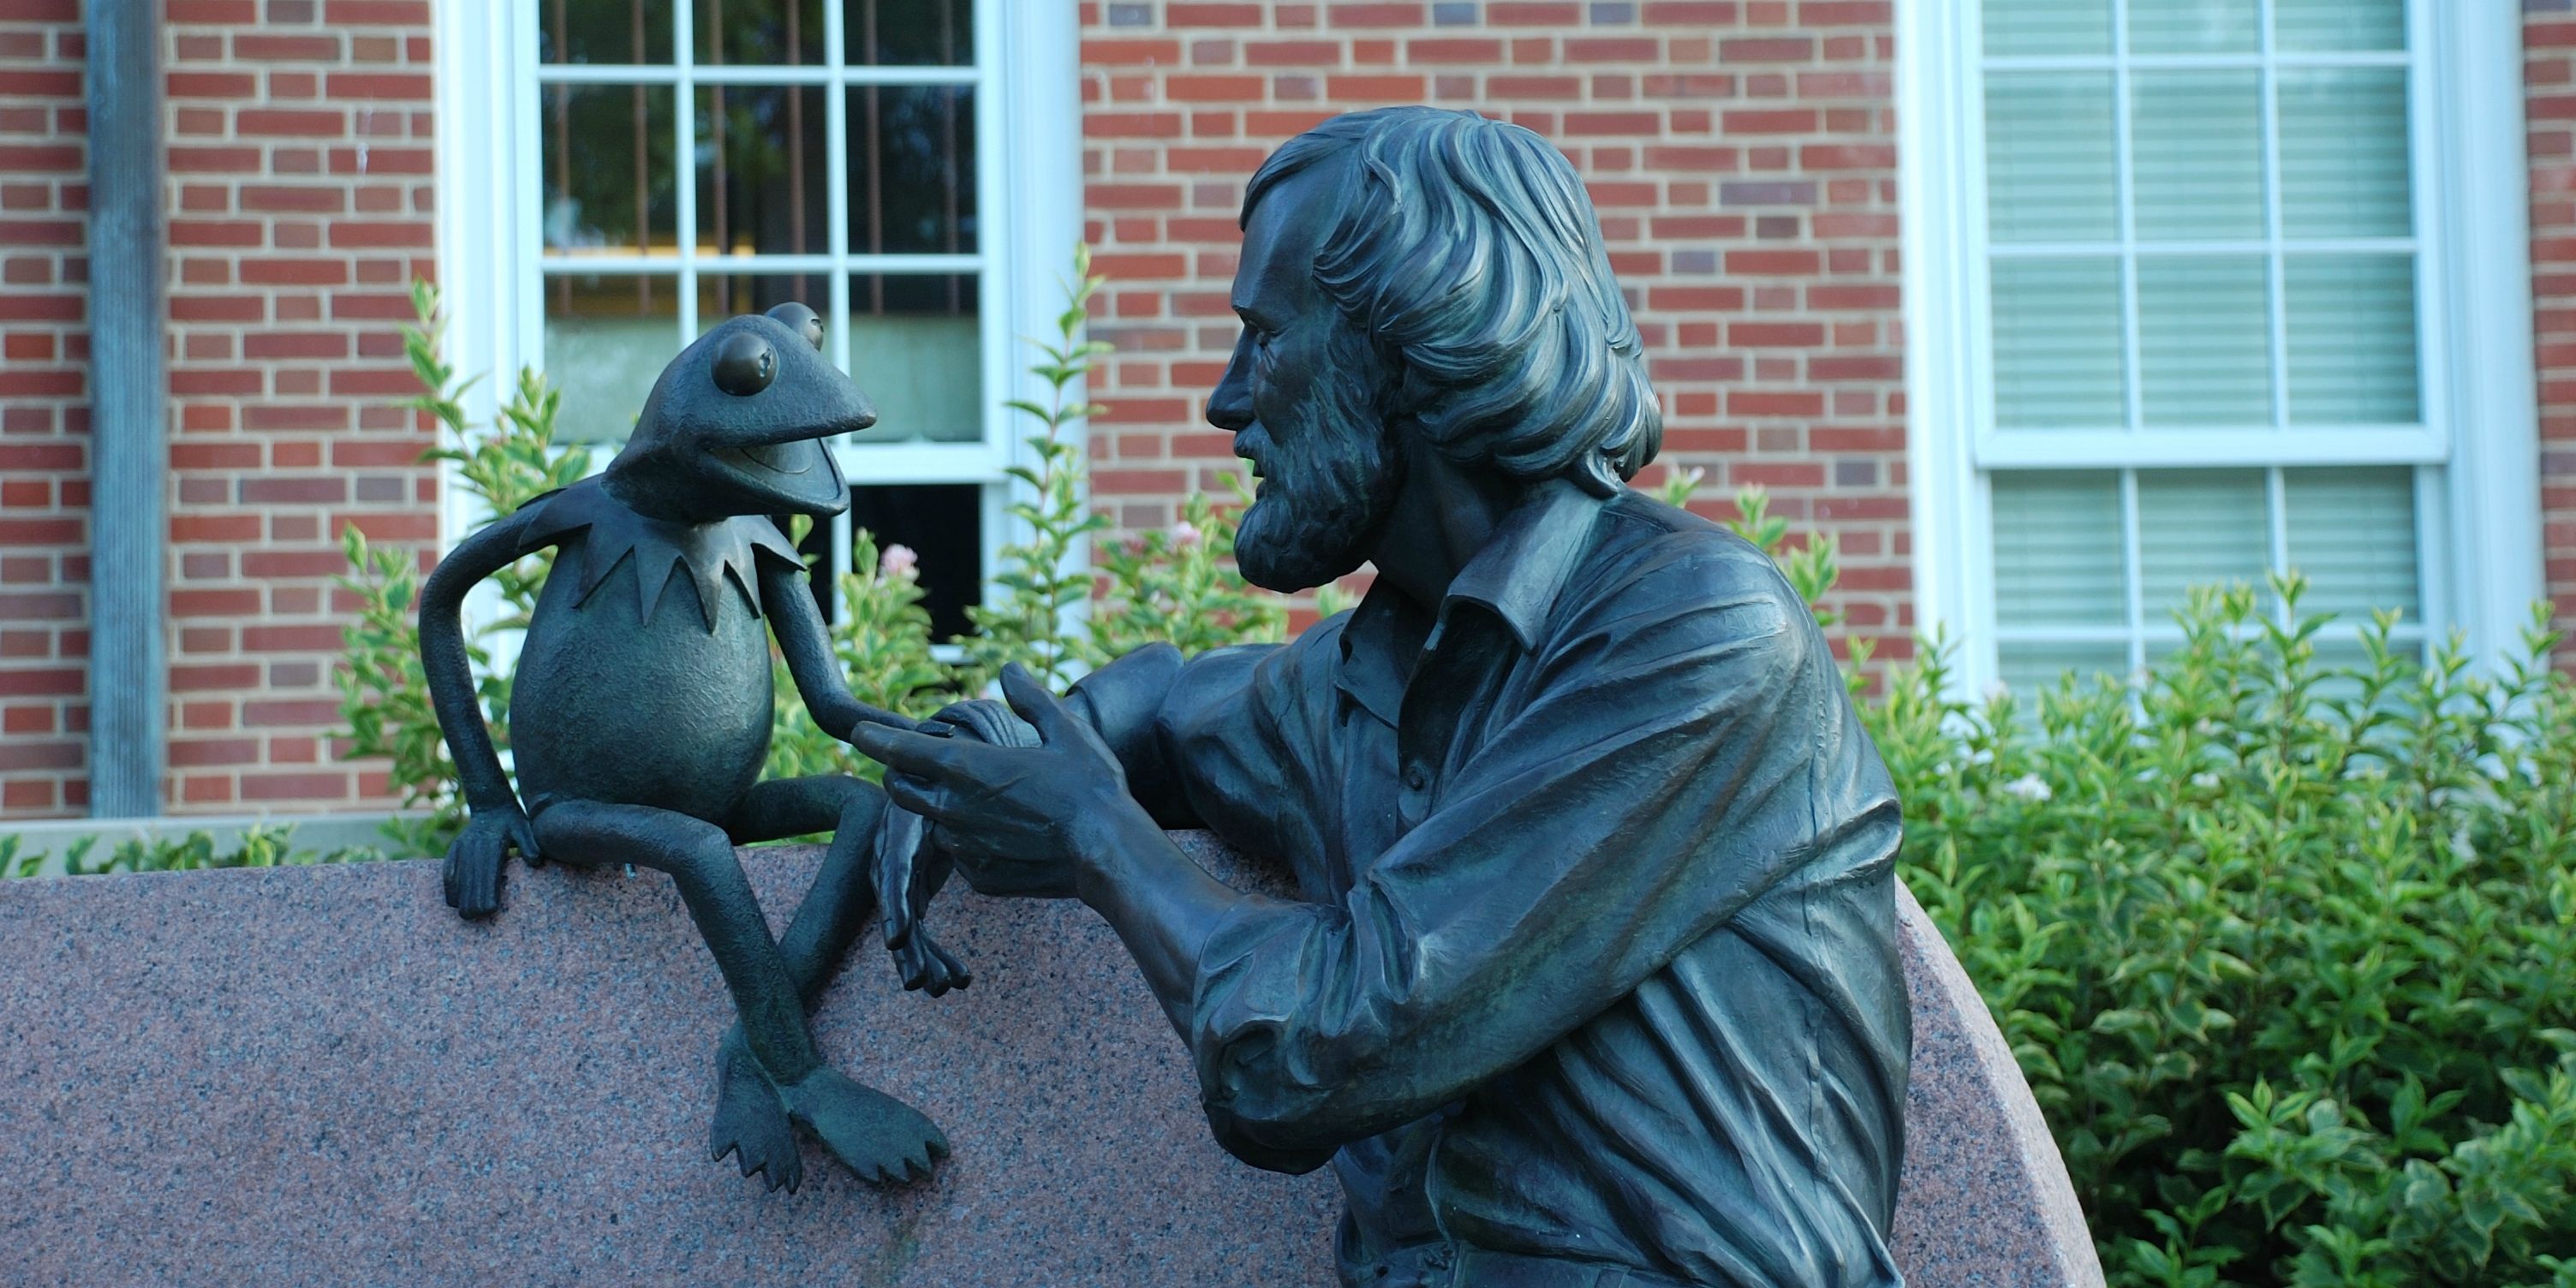 Jim Henson and Kermit the Frog statue at University of Maryland